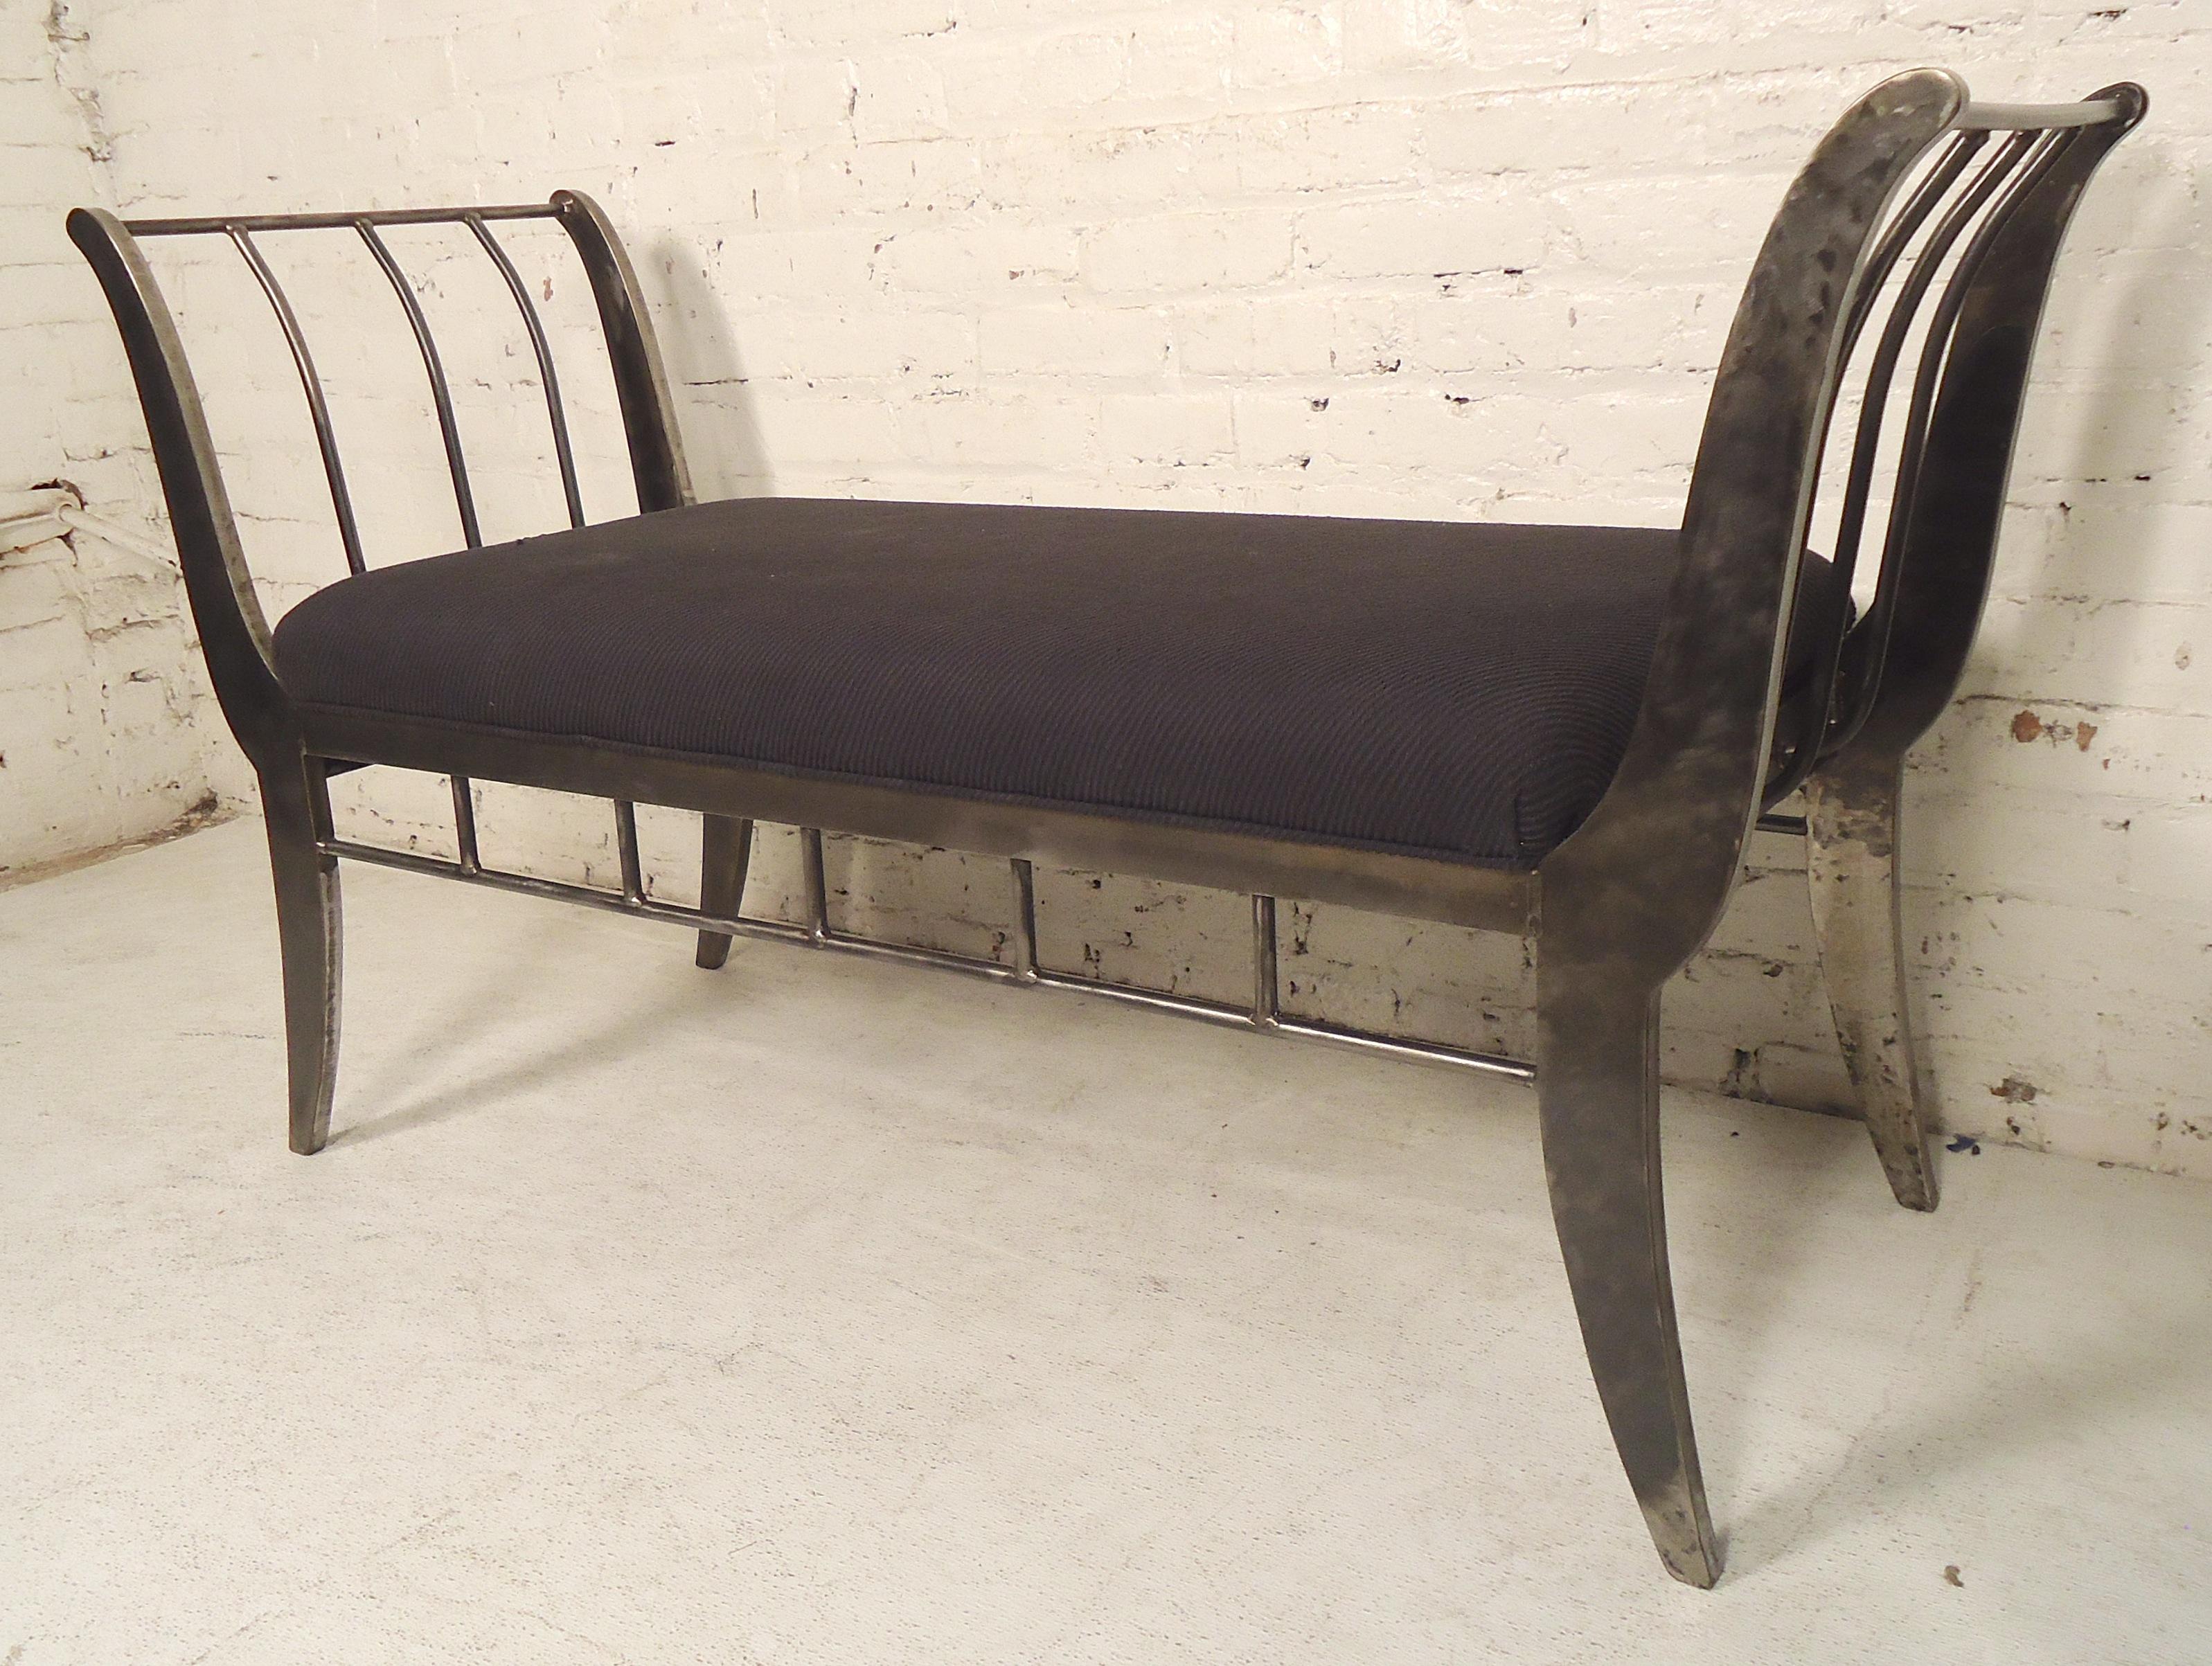 Heavy upholstered bench restored in a bare metal style finish. Give a handsome look to home or office.

(Please confirm item location - NY or NJ - with dealer).
 